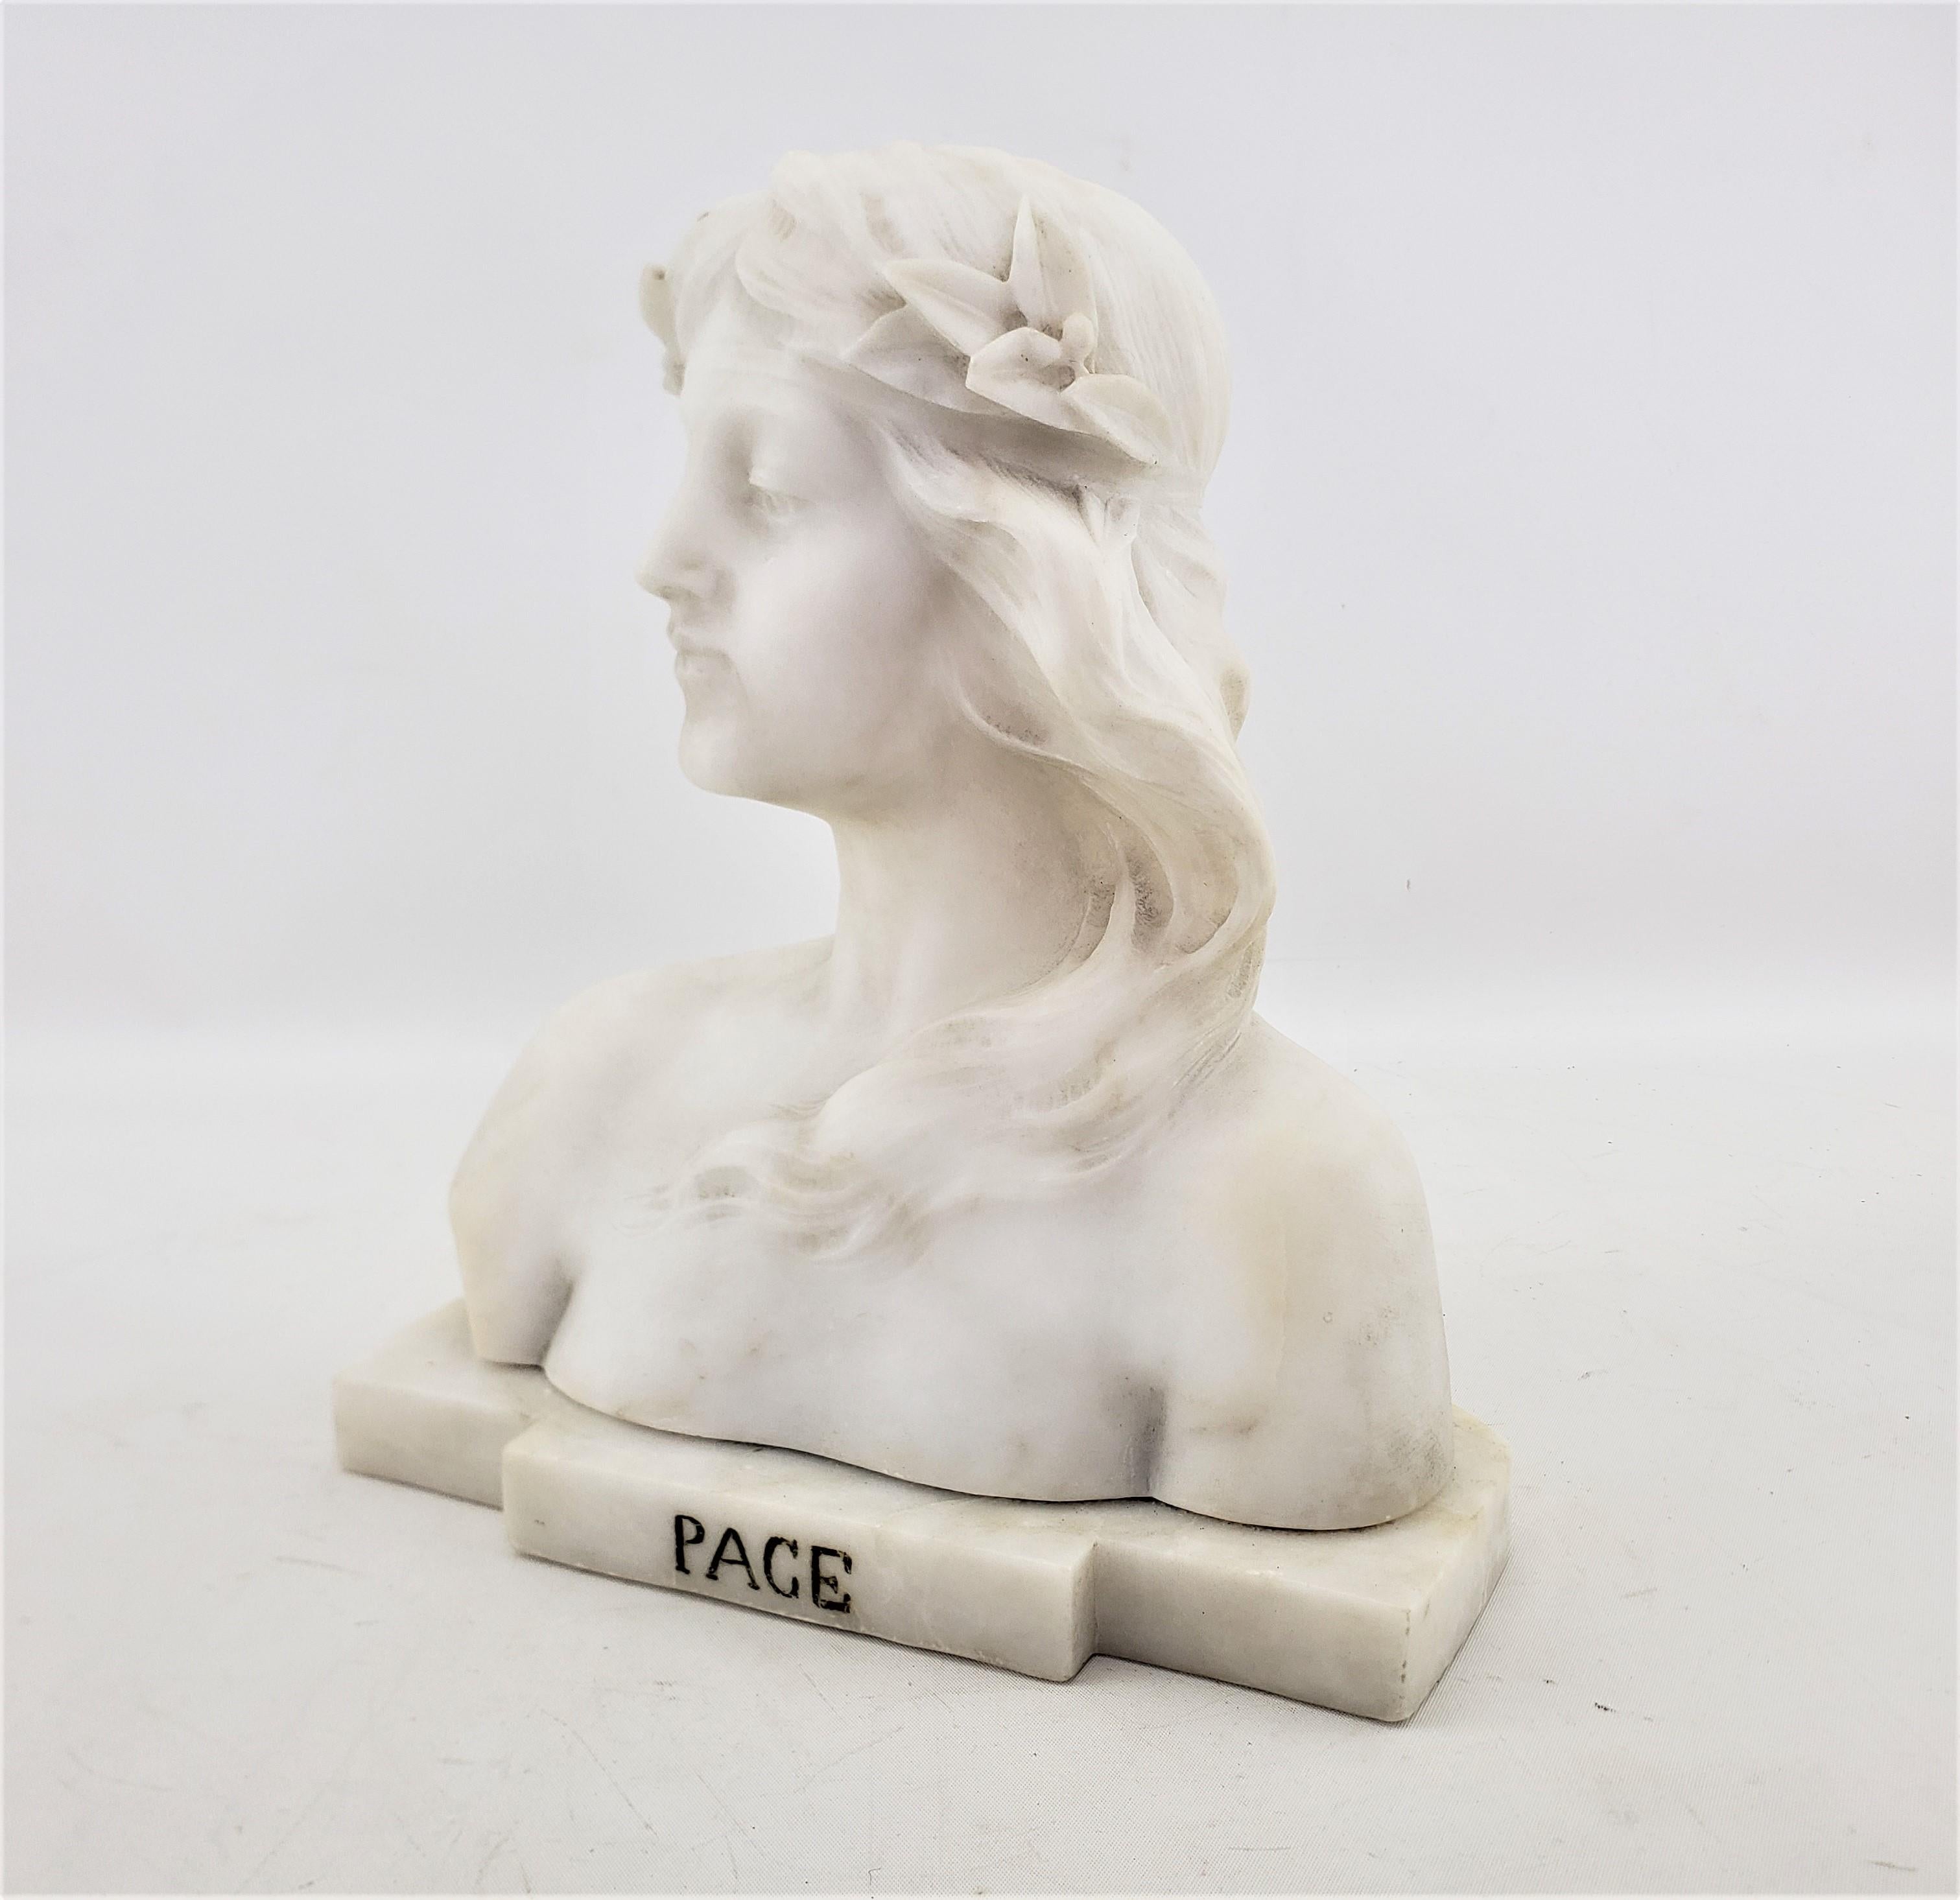 This antique bust is signed by the artist consistent with the work of the renowned Emelio Zocchi of Italy and dating to approximately 1900 and done in the period Renaissance Revival style. This well executed bust of sculpture is done in white marble